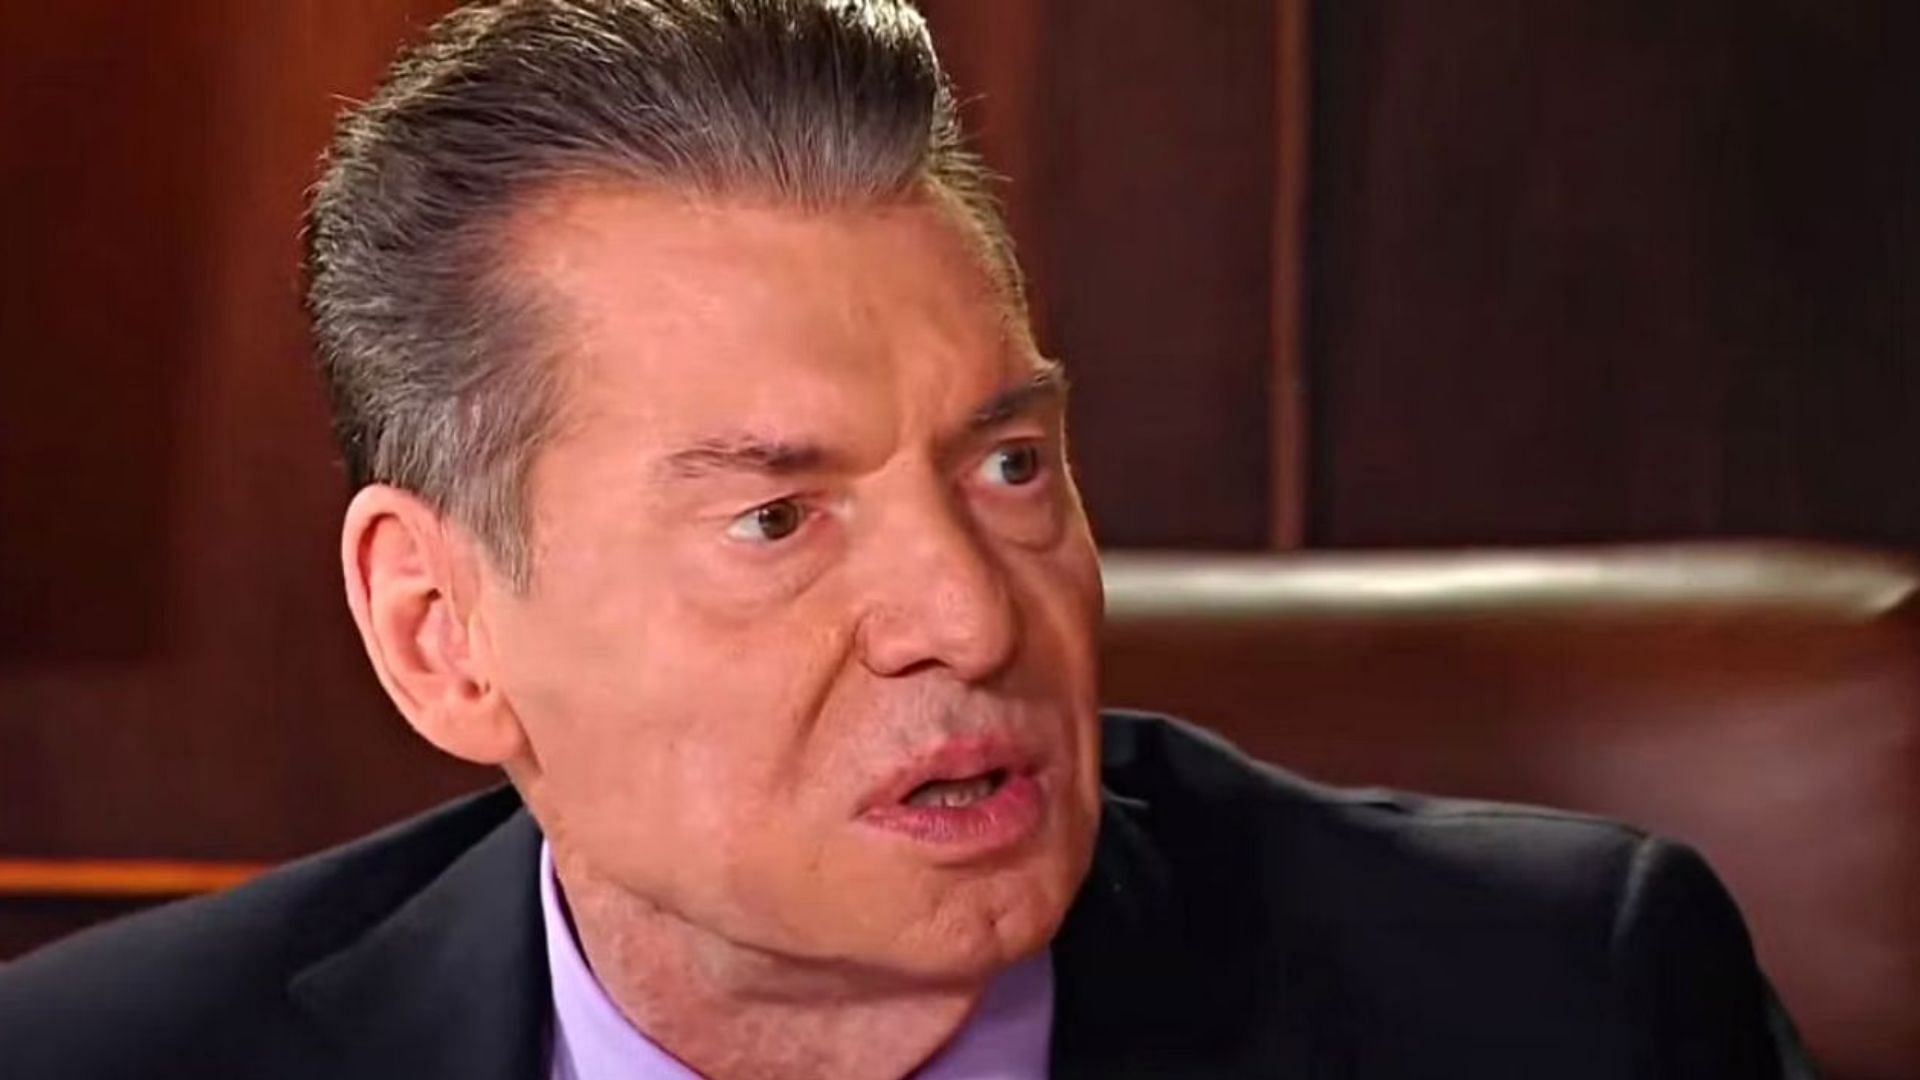 A WWE legend has disclosed a shouting match with Vince McMahon